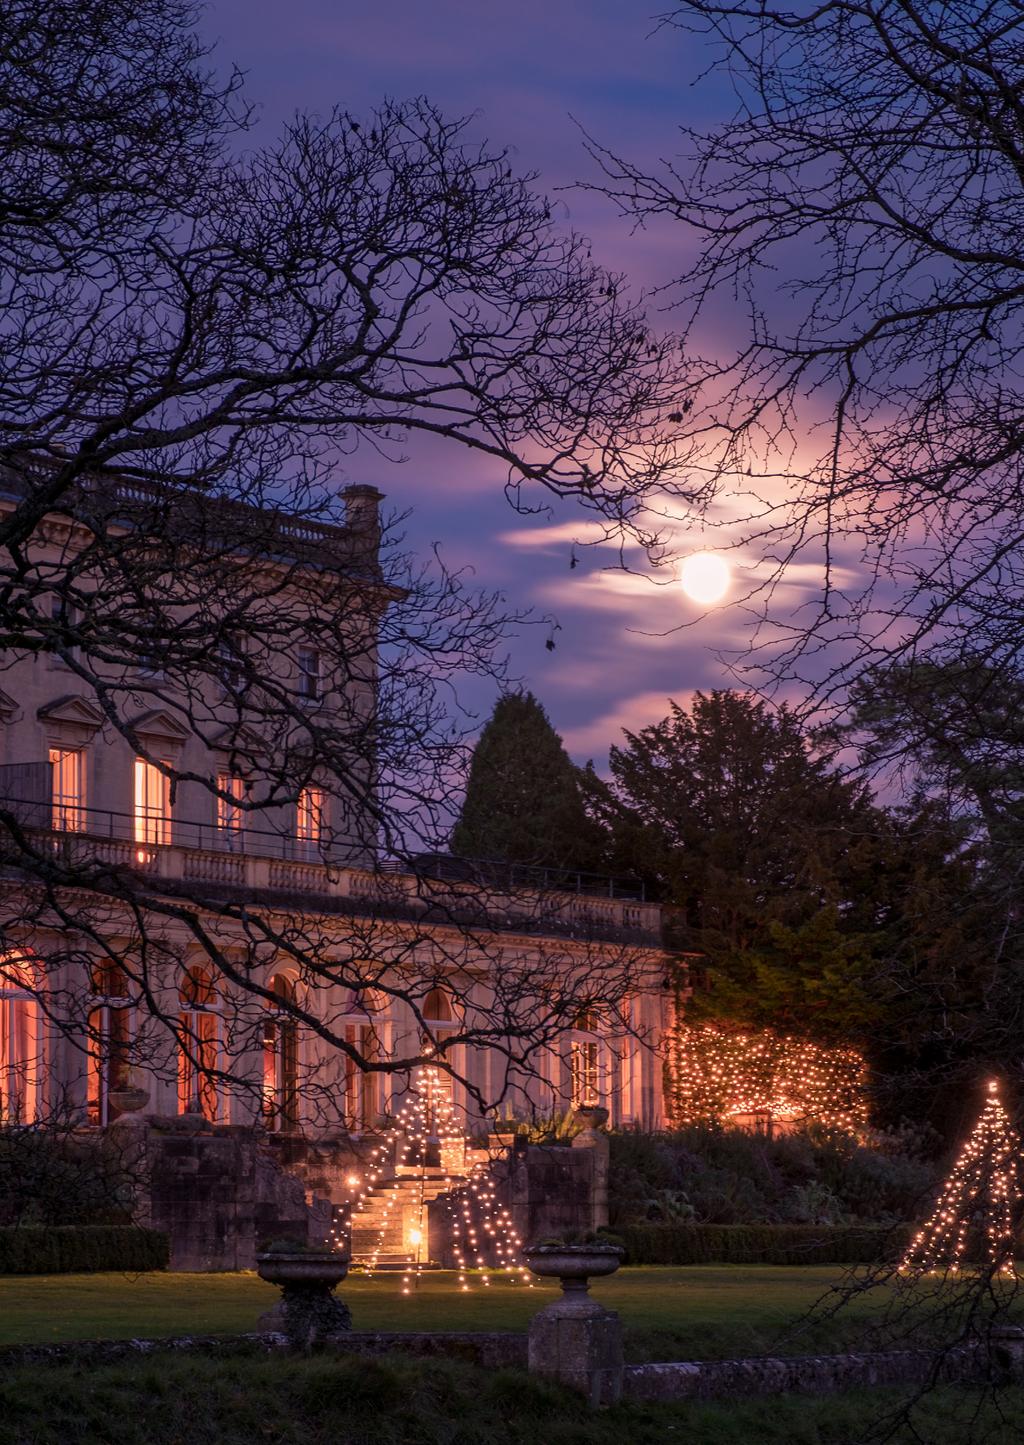 C HRISTMAS AT COWLEY What s not to love about Christmas at Cowley Manor?